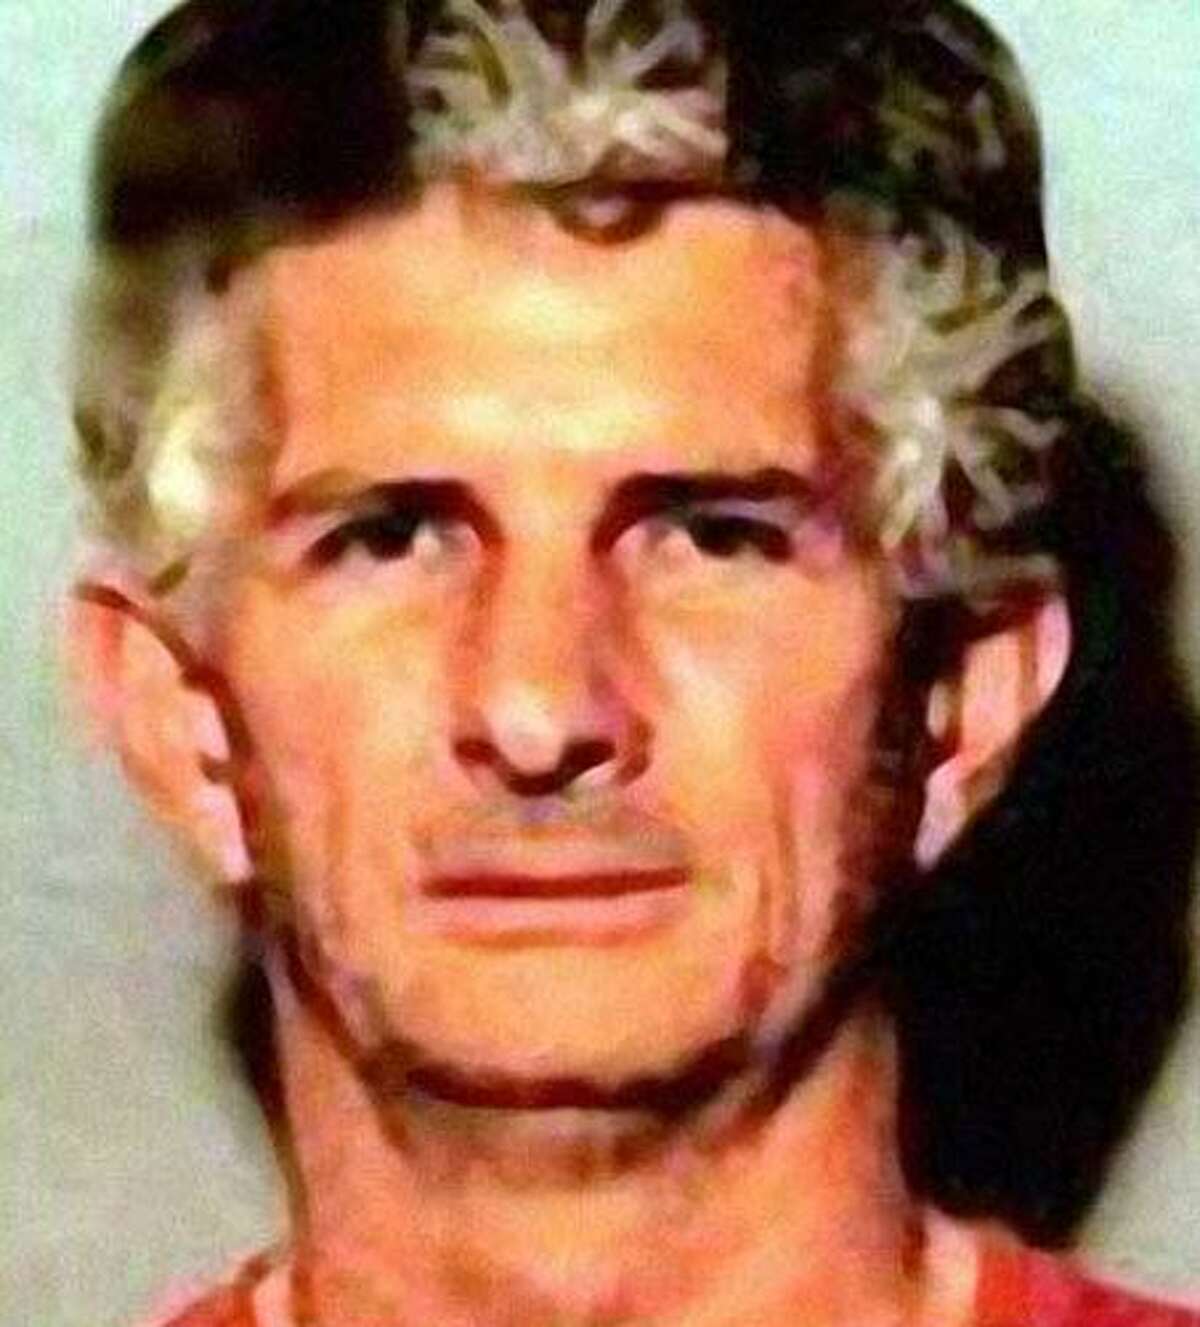 Name: Charles Frederick AlbrightAlias: The Eyeball KillerCrime: Killed three women in the Dallas area in the early '90s. Investigators noted each victim had their eyeballs surgically removed.Status: In 1994, Albright was convicted and sentenced to life in prison. He is incarcerated at Clements Unit in Amarillo, Texas.